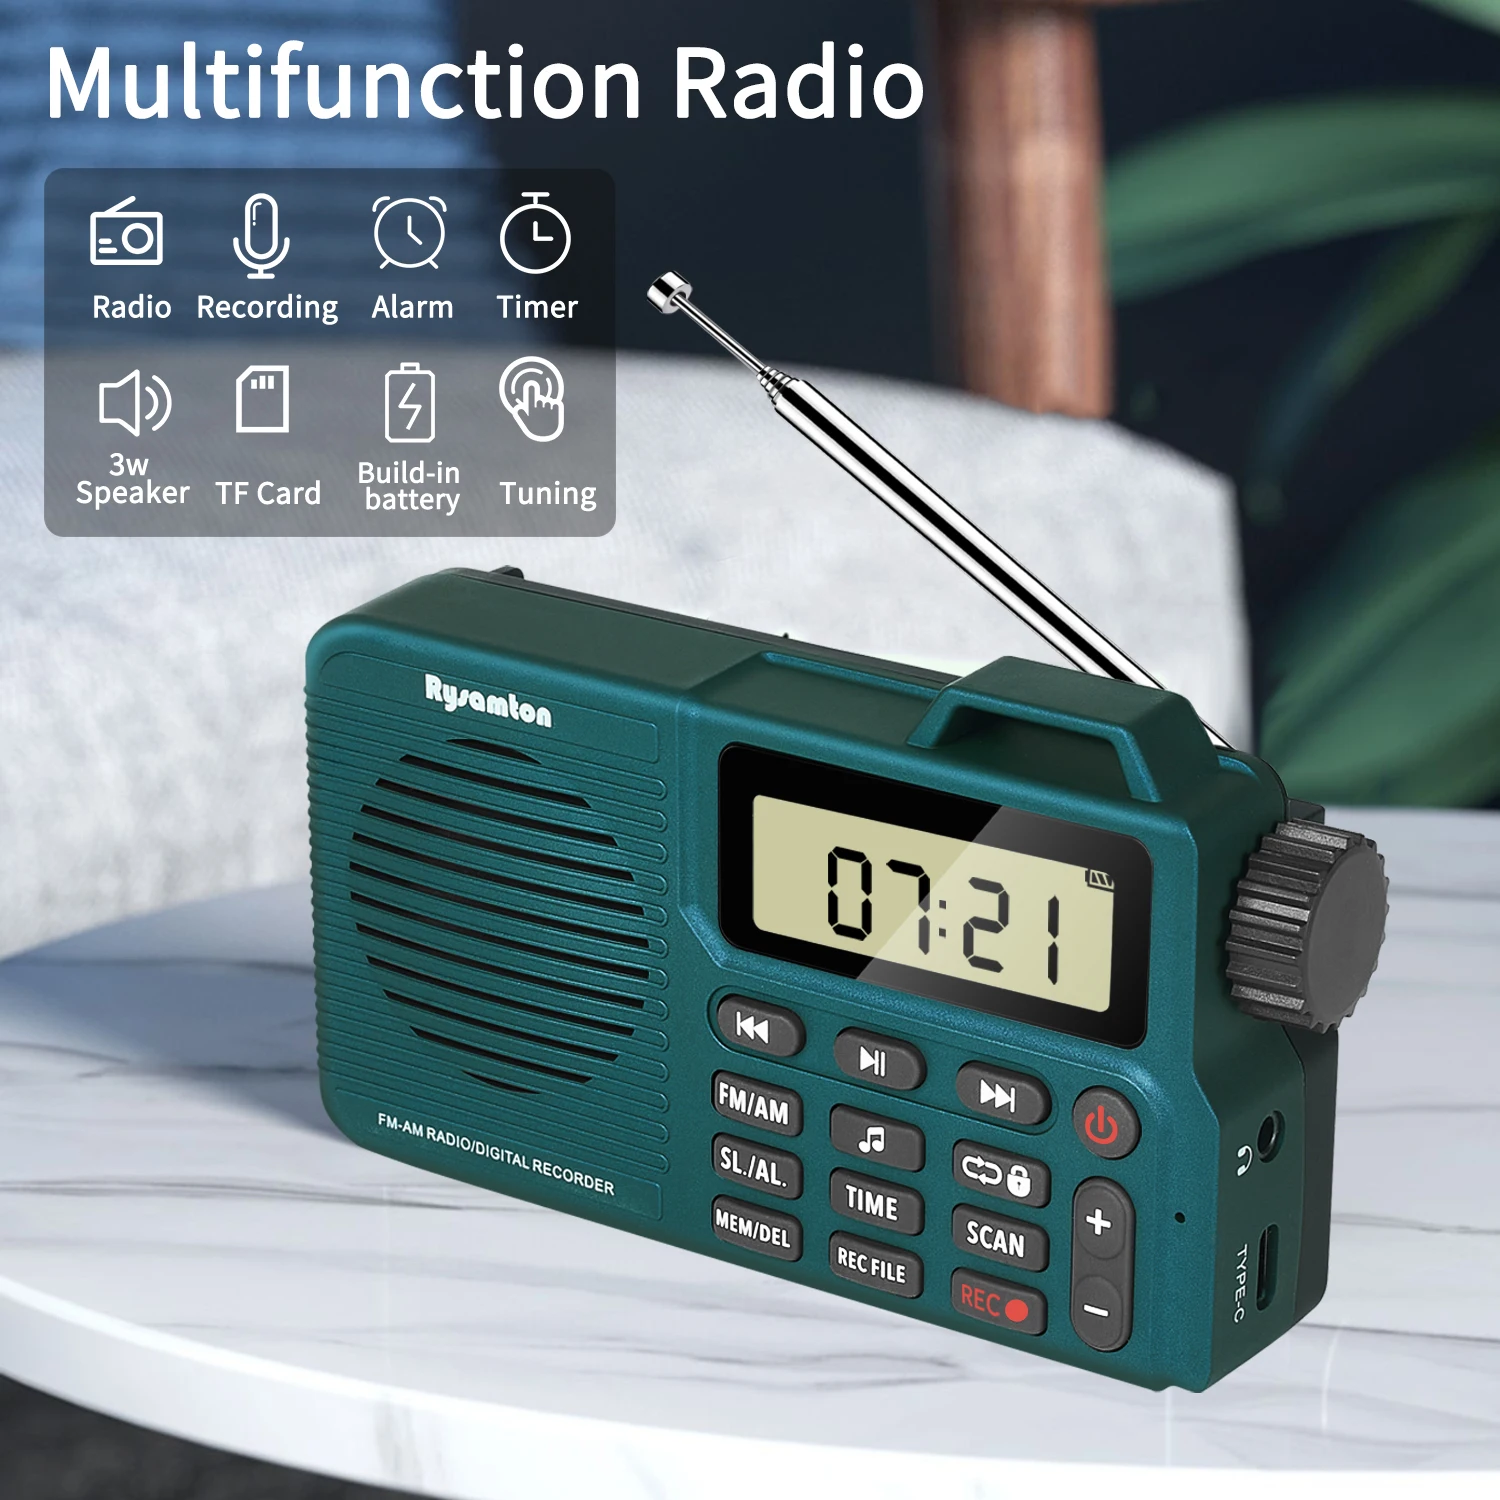 

Portable Bluetooth AM/FM Radio Outdoor Music Speaker Supports SD Card and Recording with Built-in Battery for Long Battery Life